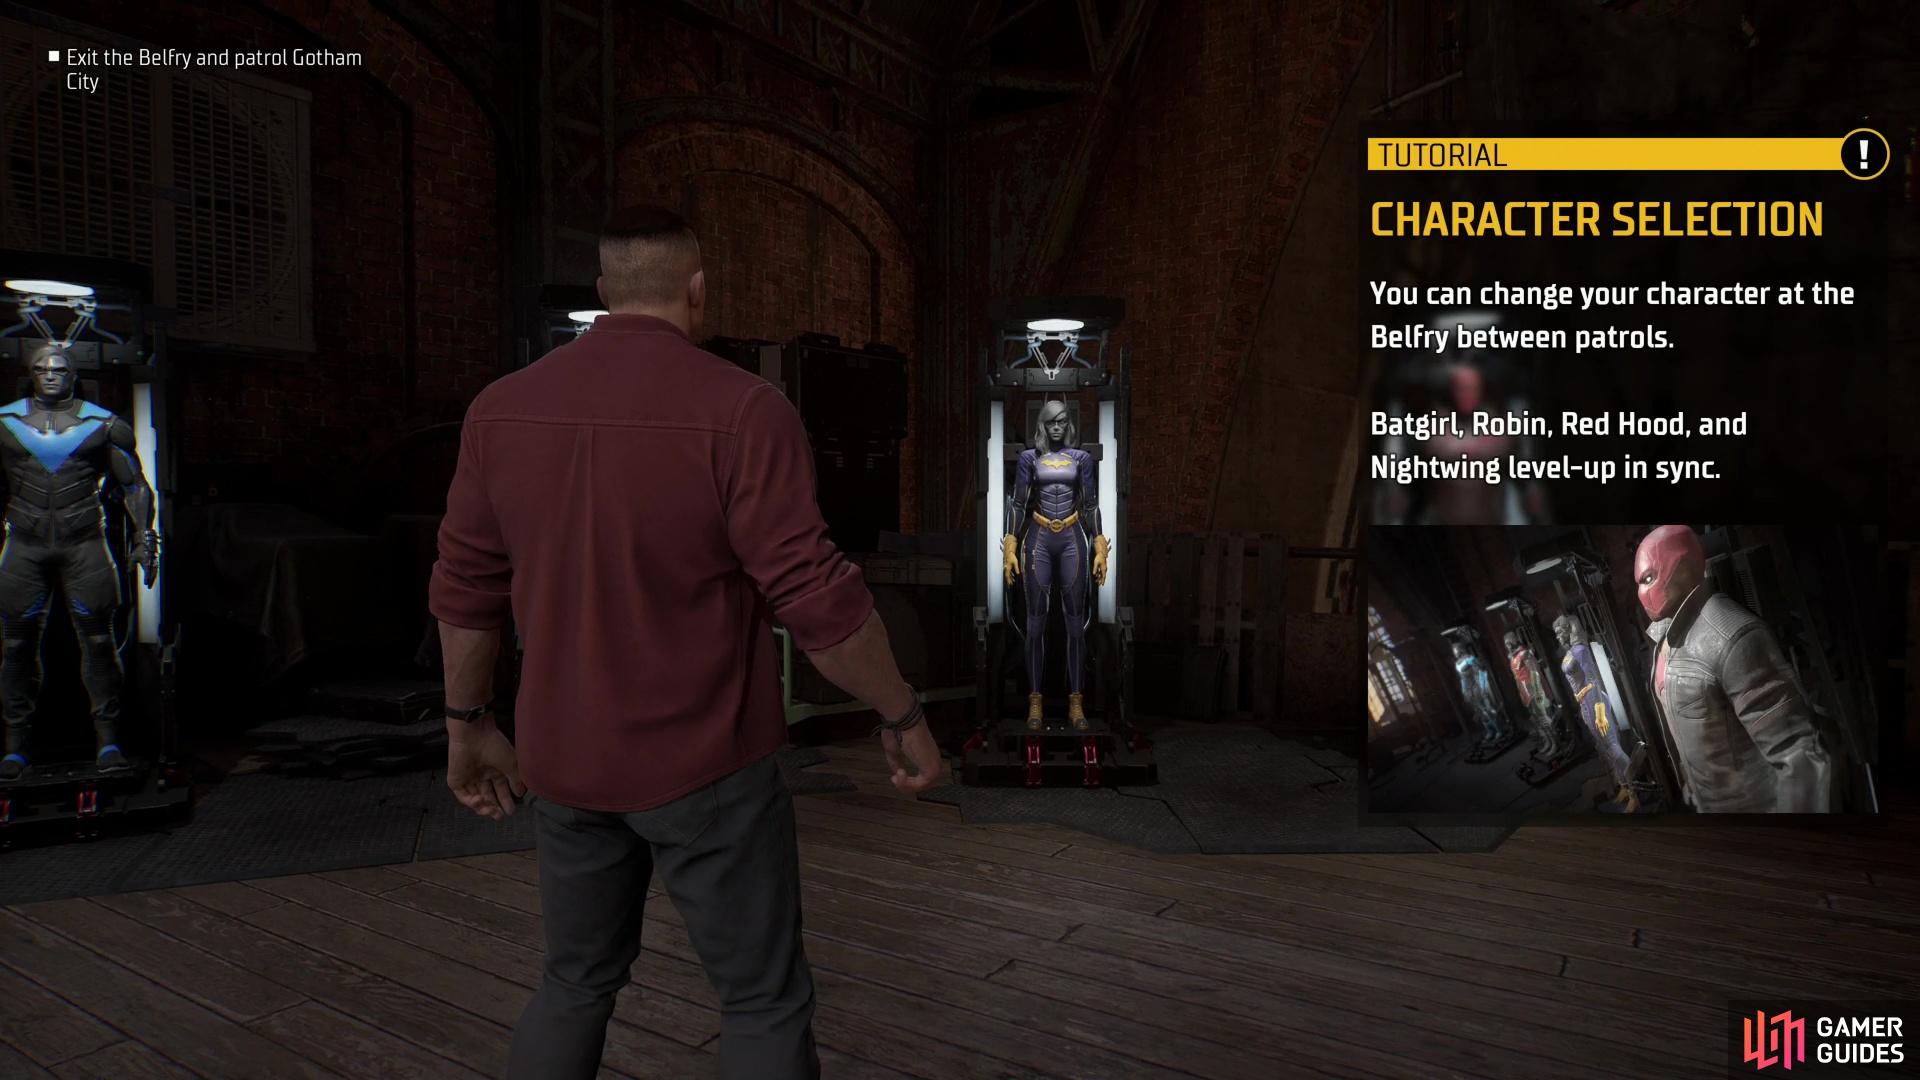 To change characters, just interact with the suit of the selected character.